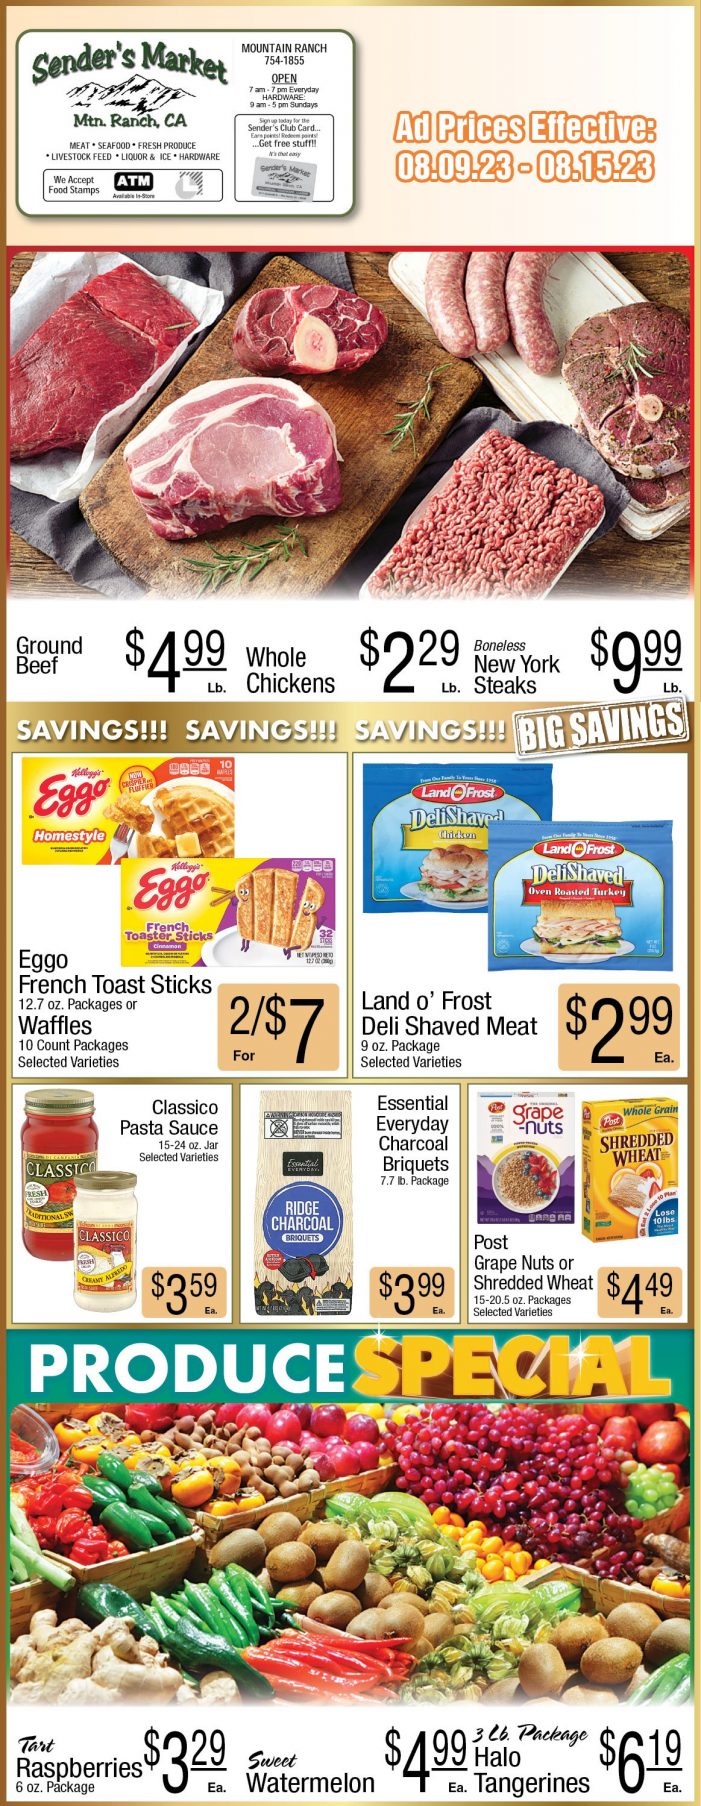 Sender’s Market Weekly Ad & Grocery Specials Through August 15th! Shop Local & Save!!